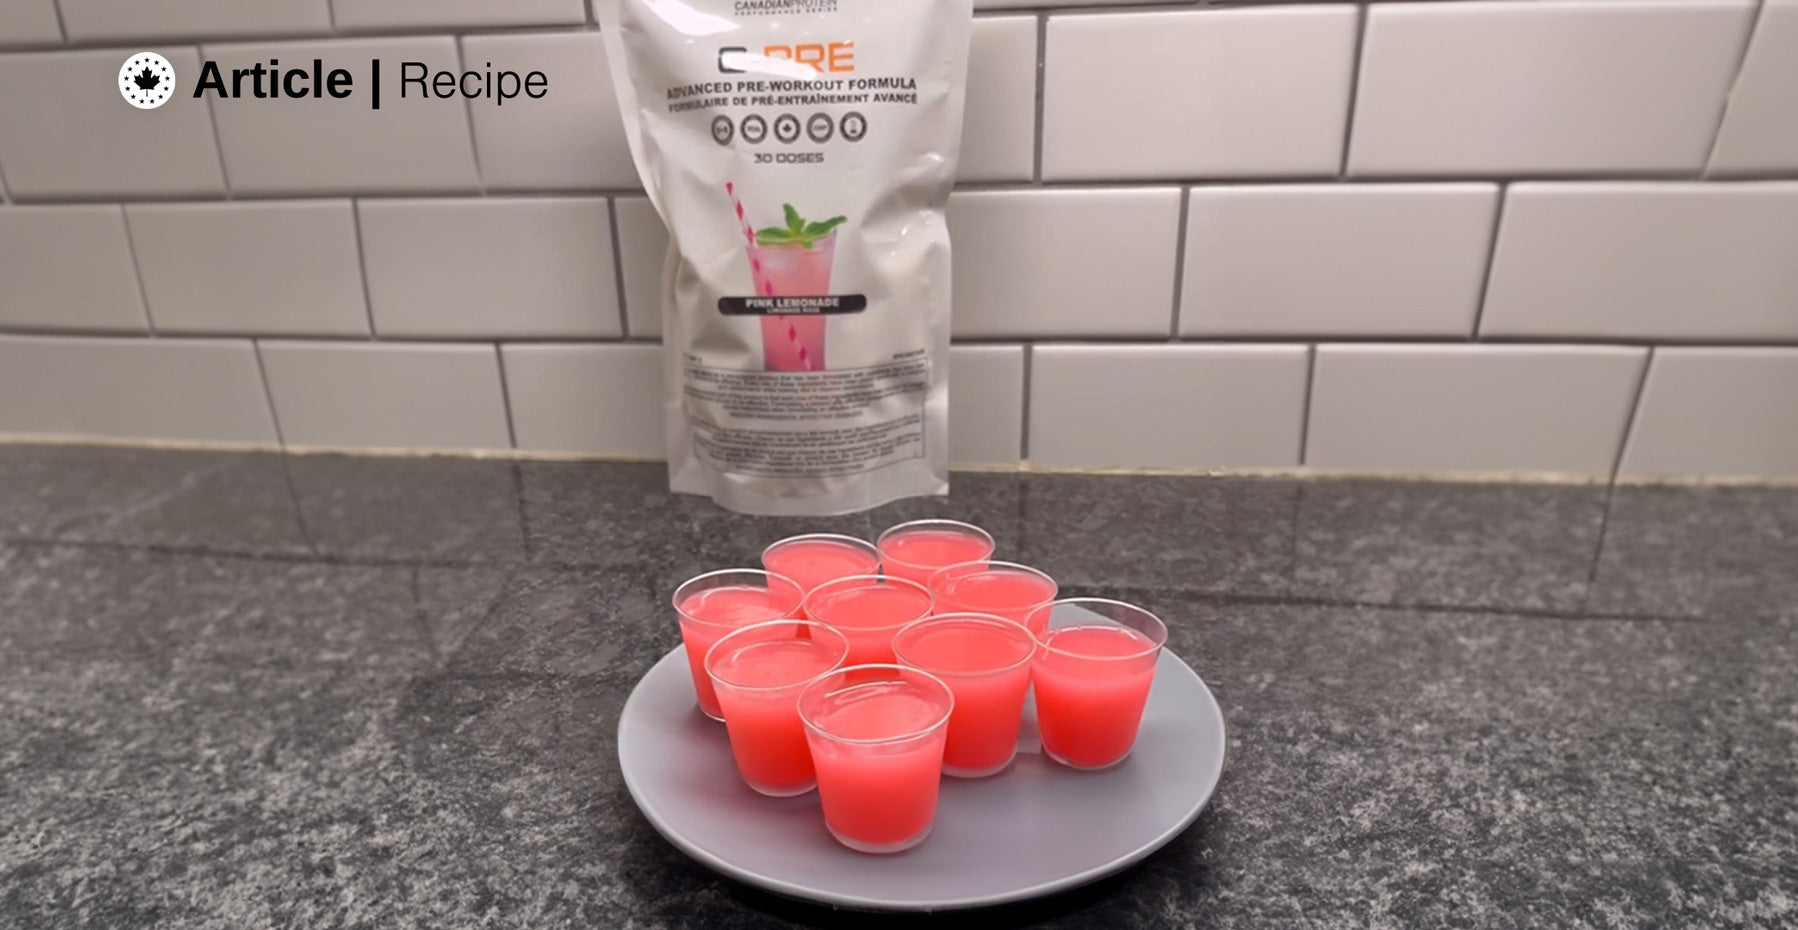 Energize Your Workout with This Pre-Workout Jello Shots Recipe